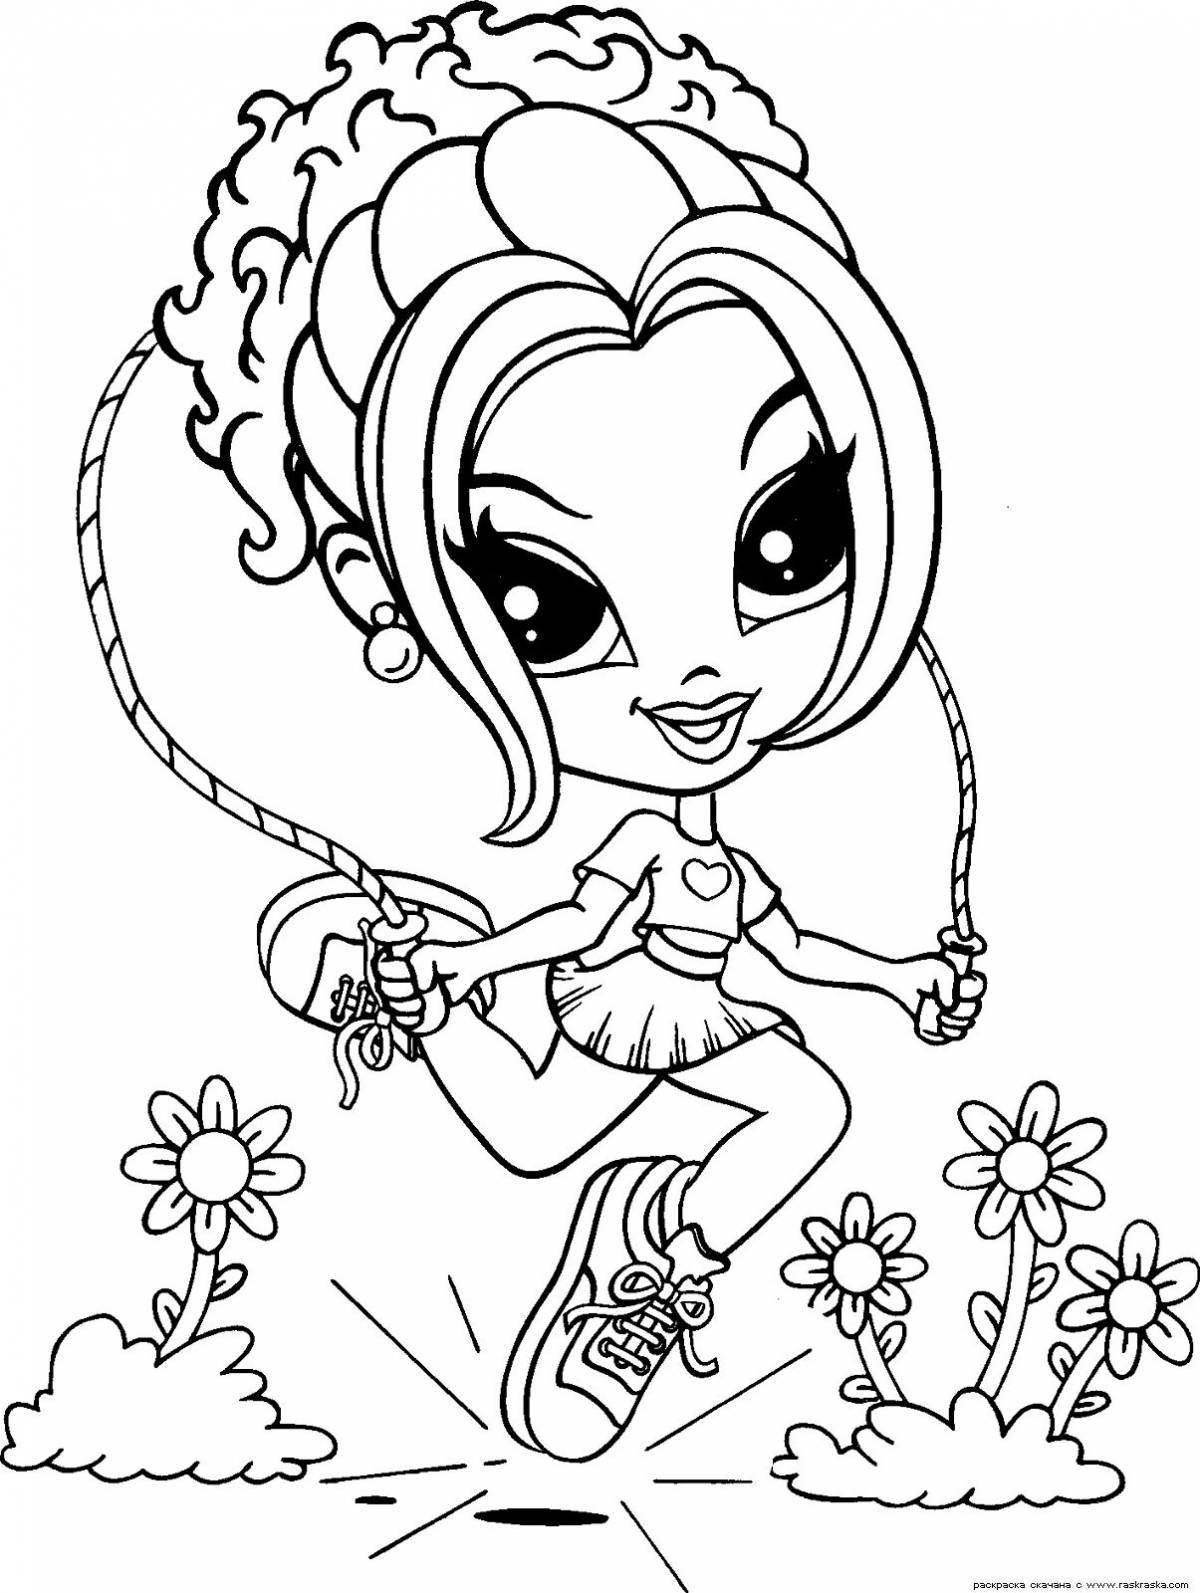 100000000000 year old girls coloring page